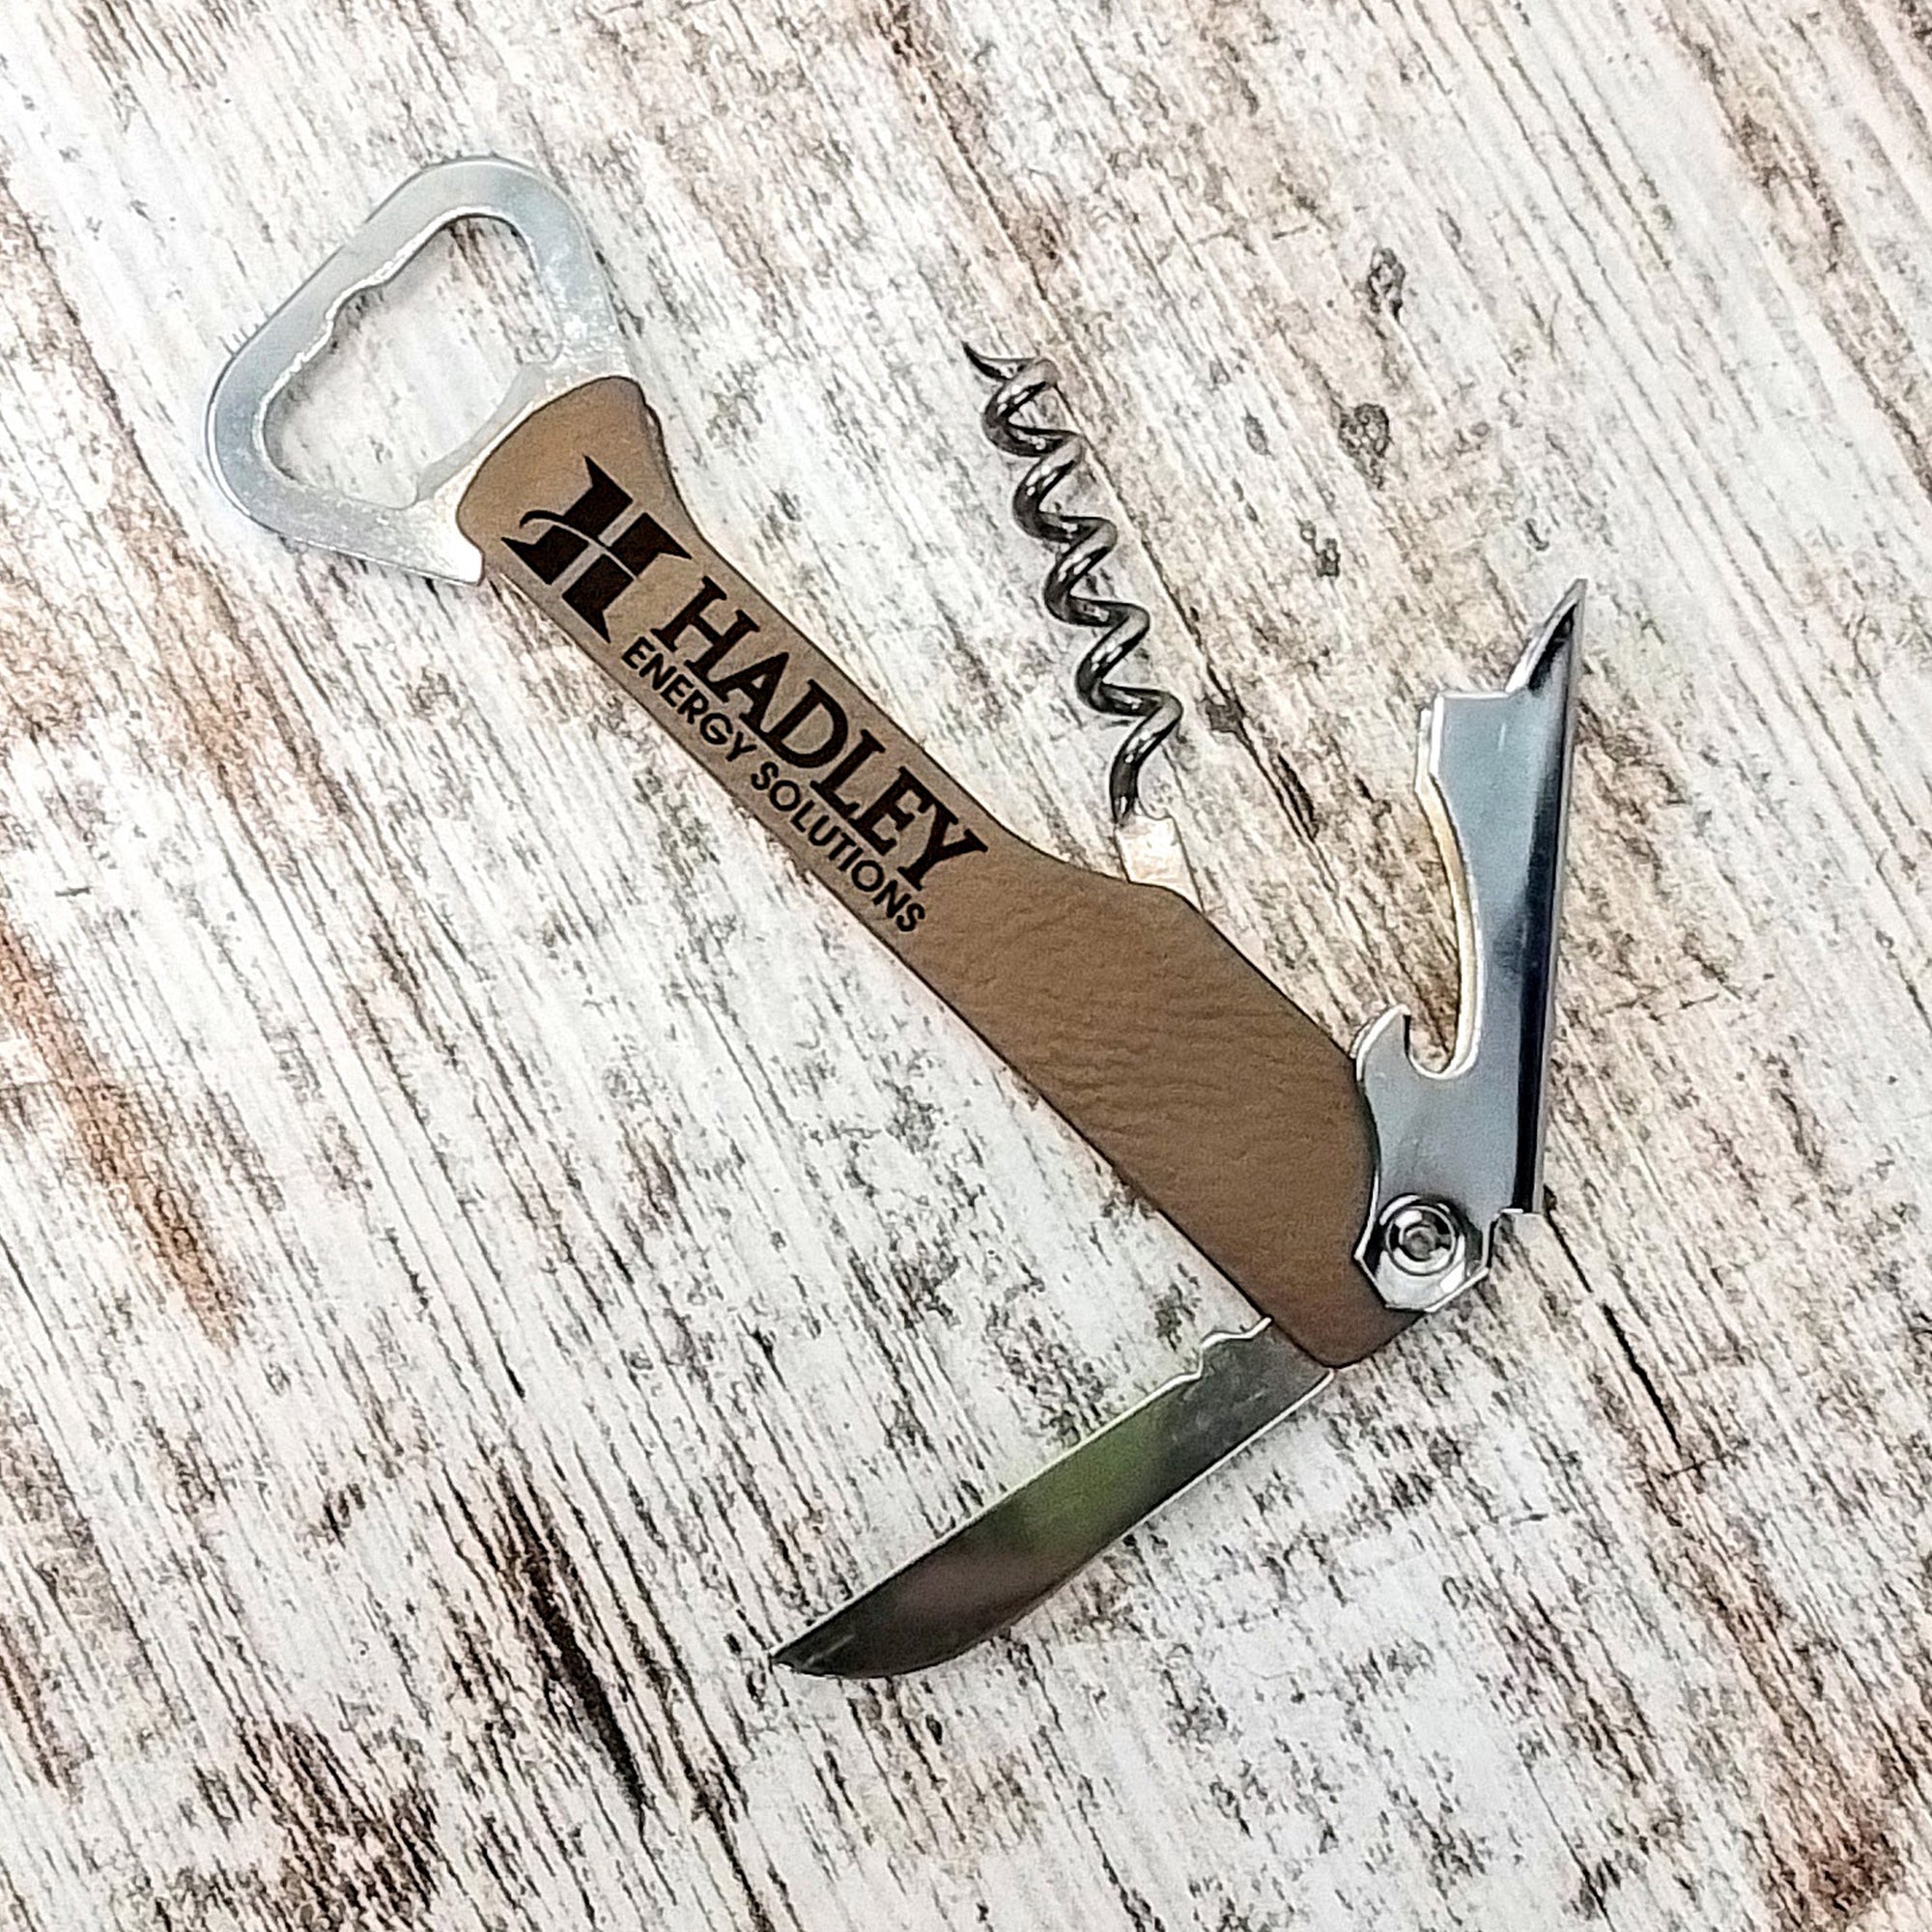 Leather Corkscrew Wine Bottle Opener - Customized with your Logo - Great for client gifts, merchandising - AirBnB STR VRBO